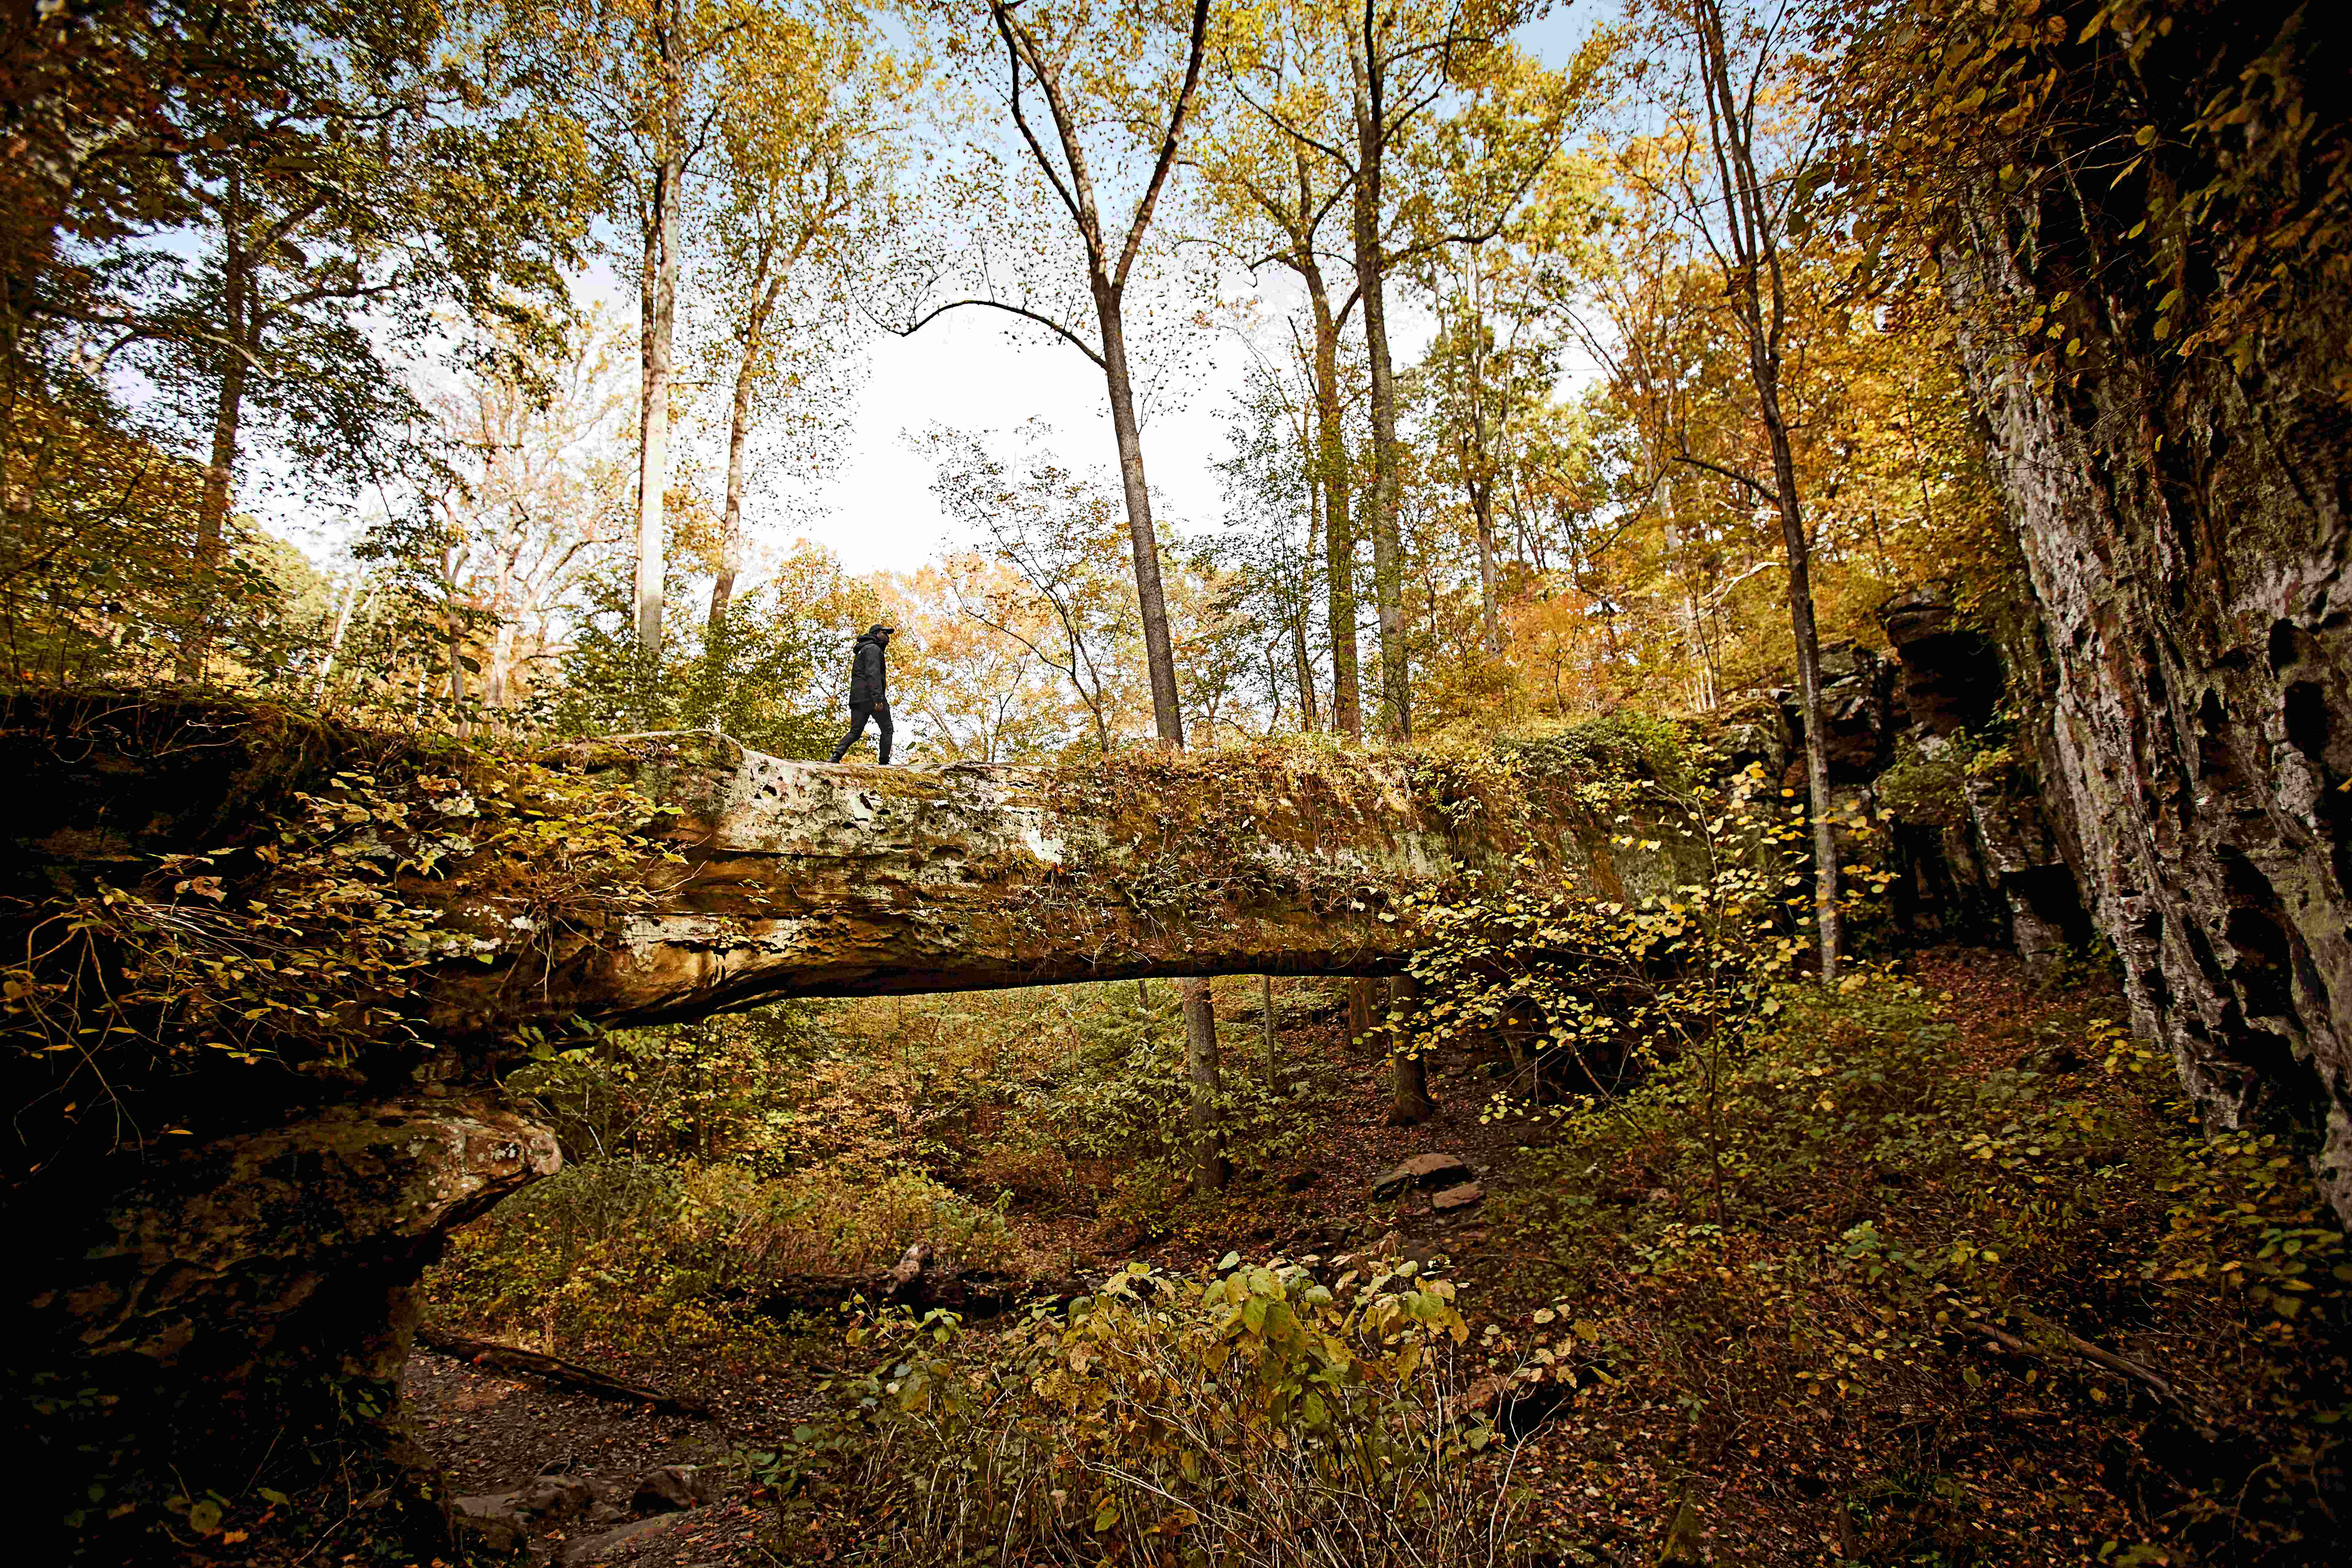 A person walking along the Pomona natural bridge in the Shawnee National Forest